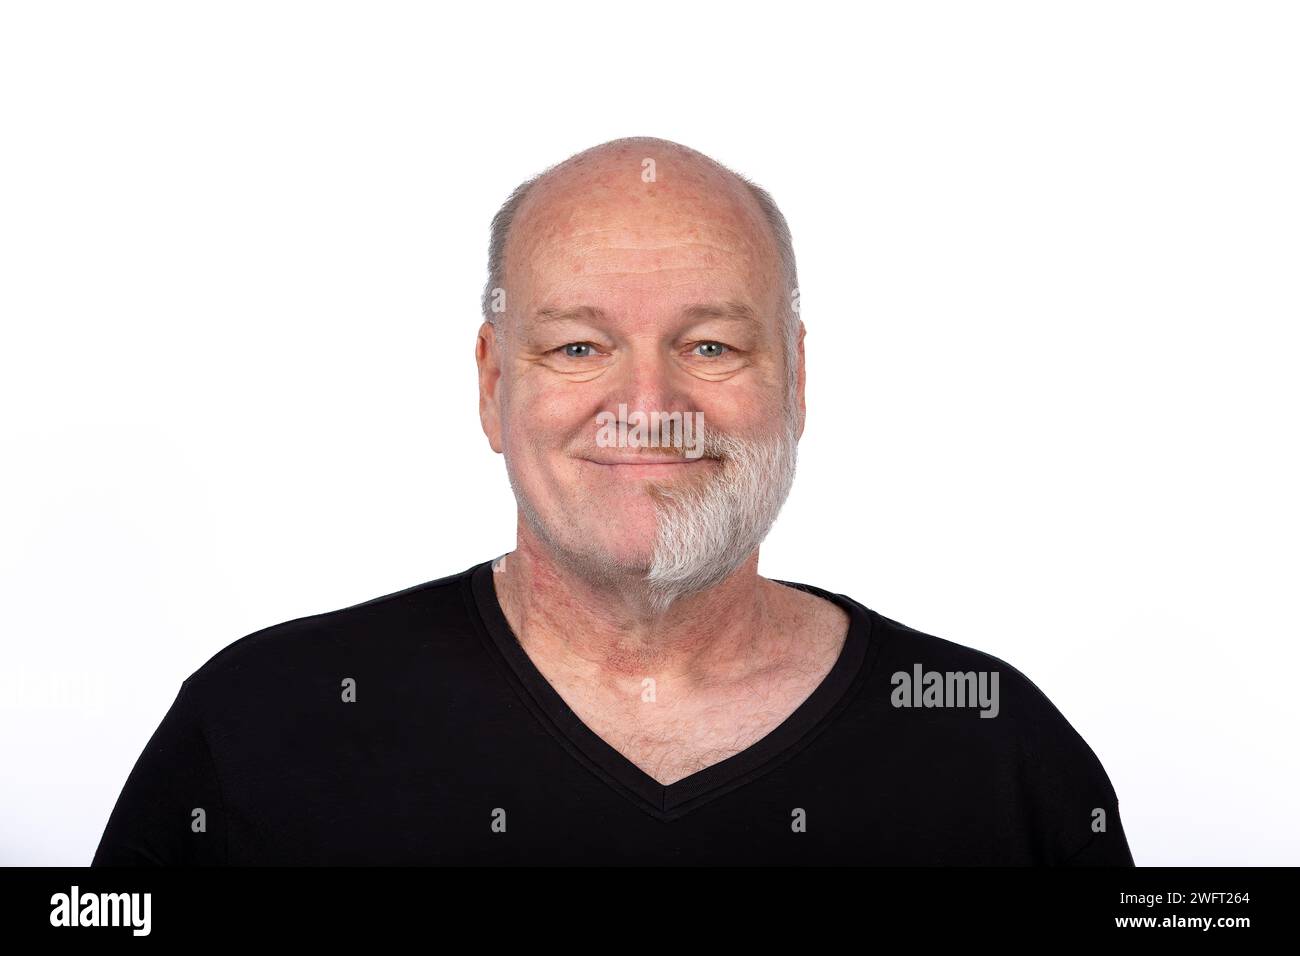 Smiling Middle-Aged Man with Unique Half-Face Beard in Black T-Shirt, Weird Beard Stock Photo